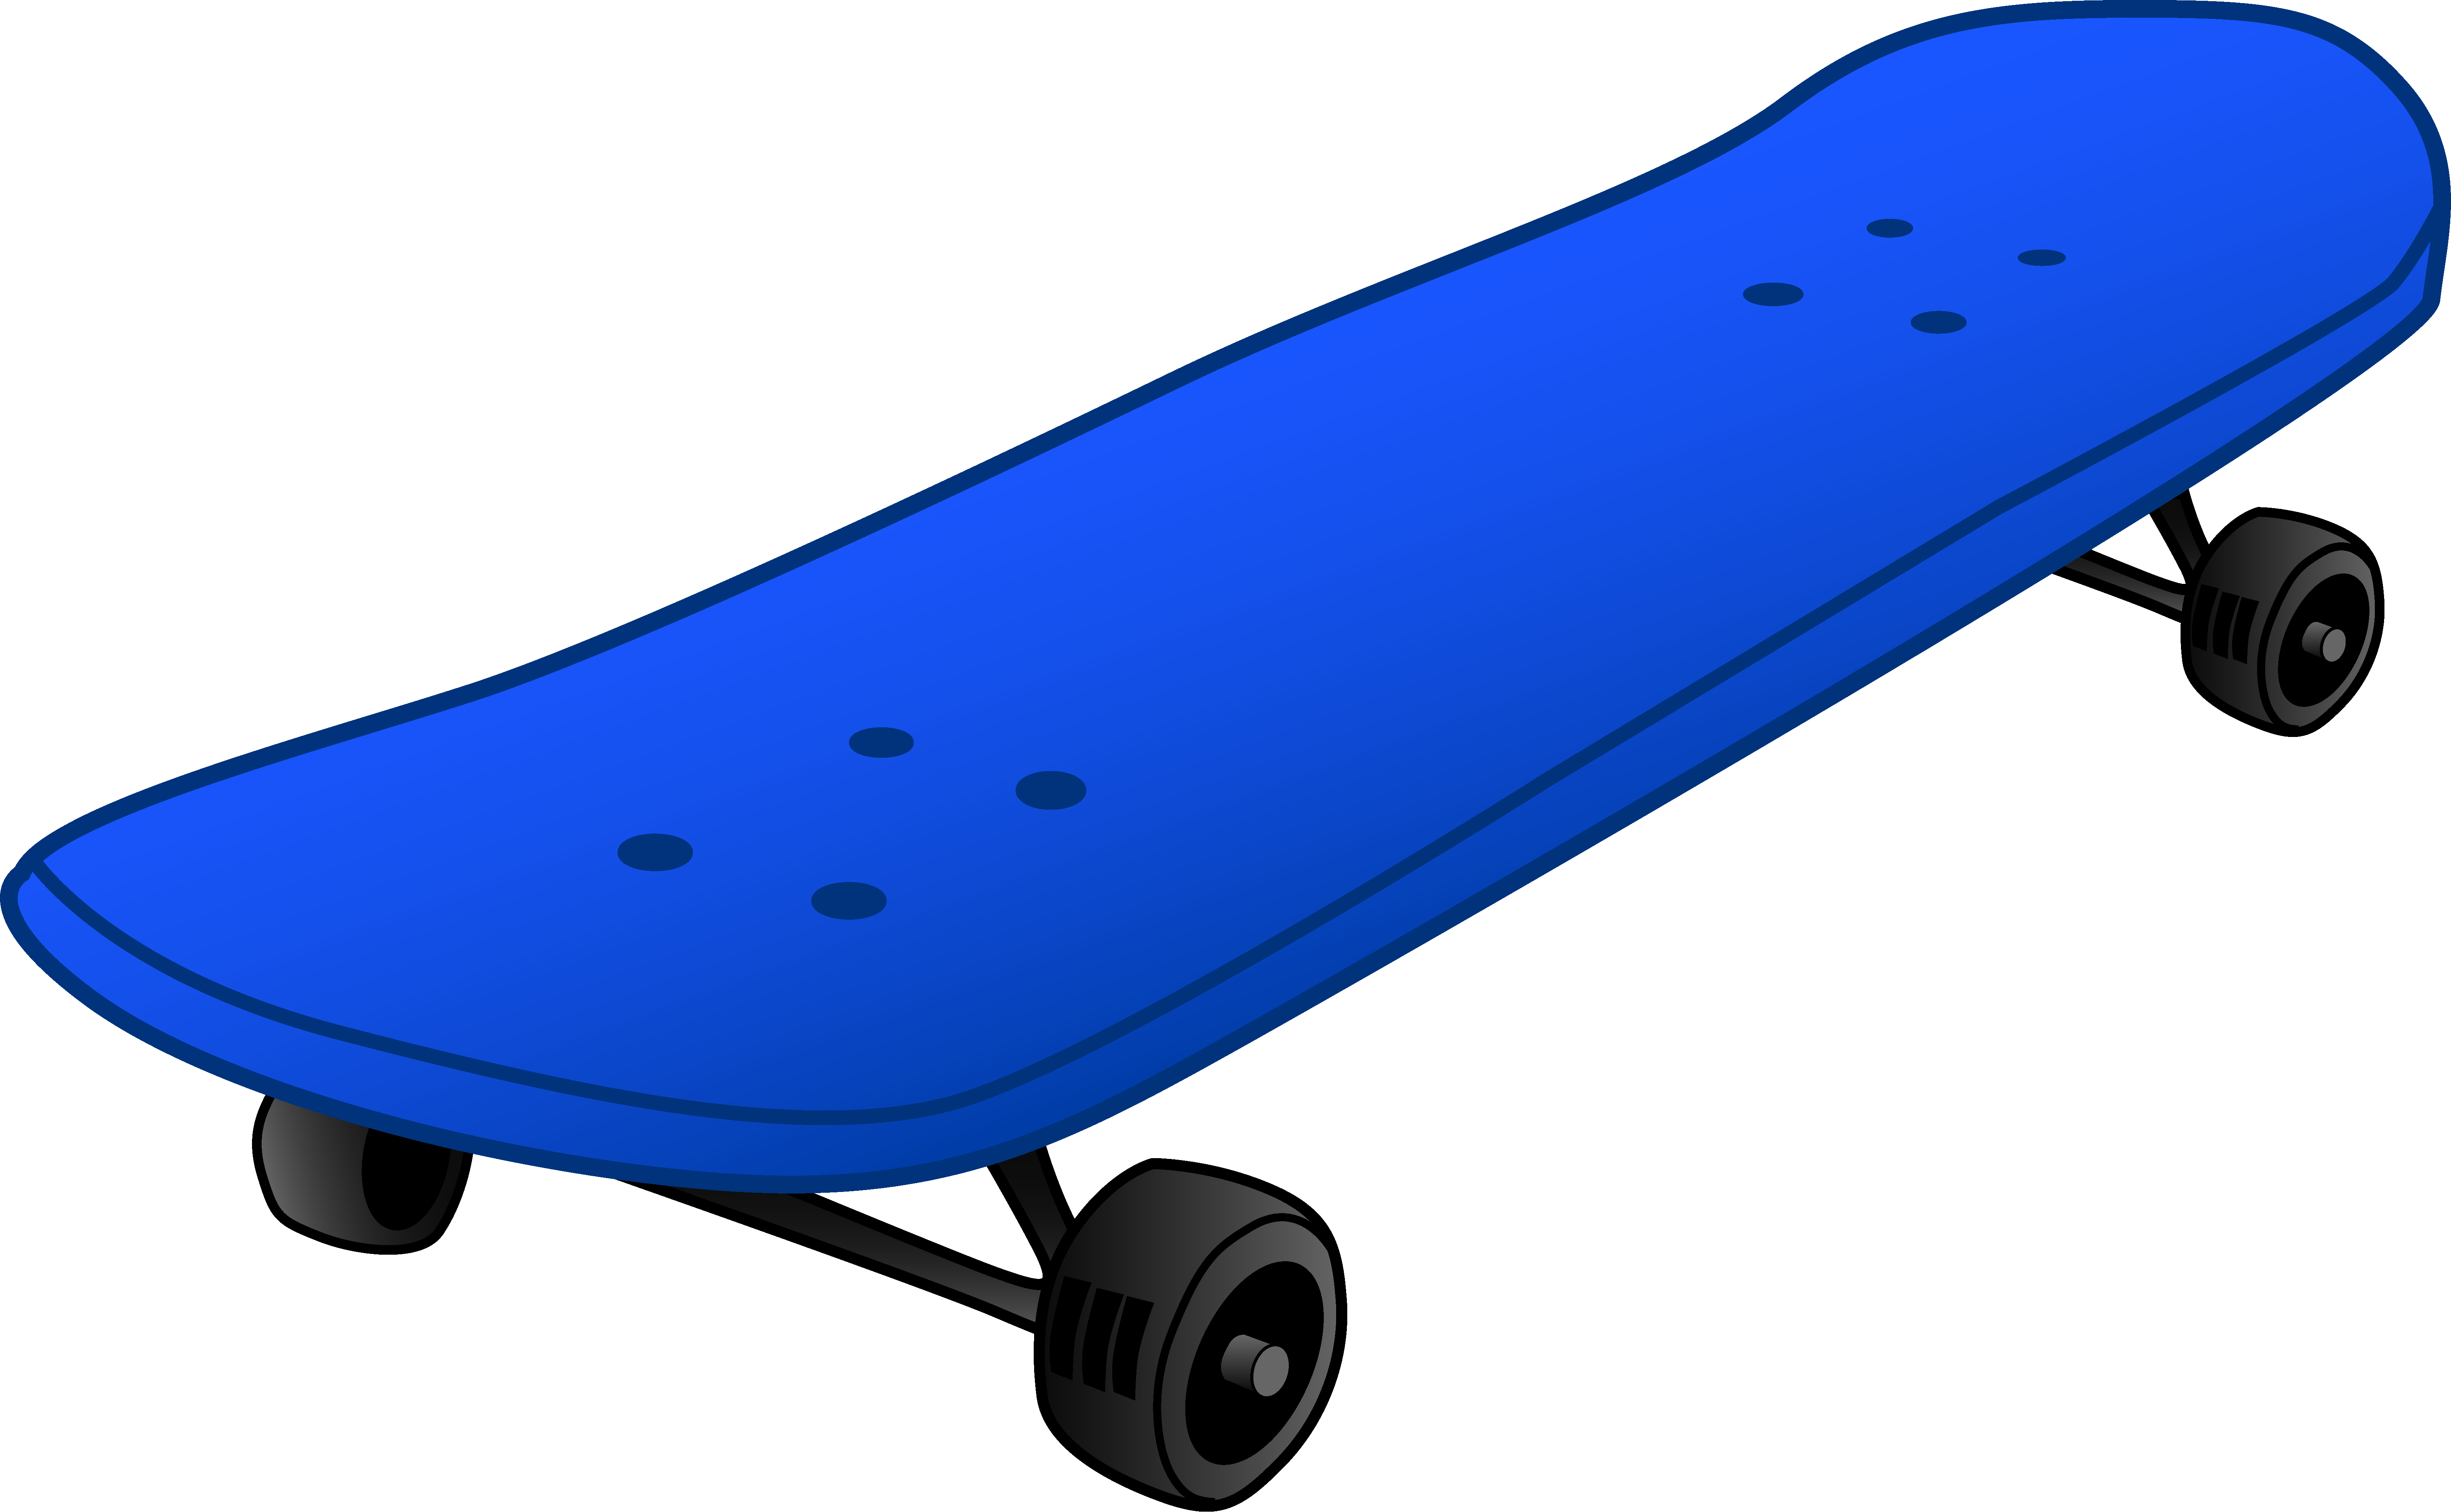 Skateboard Clip Art Borders | Clipart library - Free Clipart Images